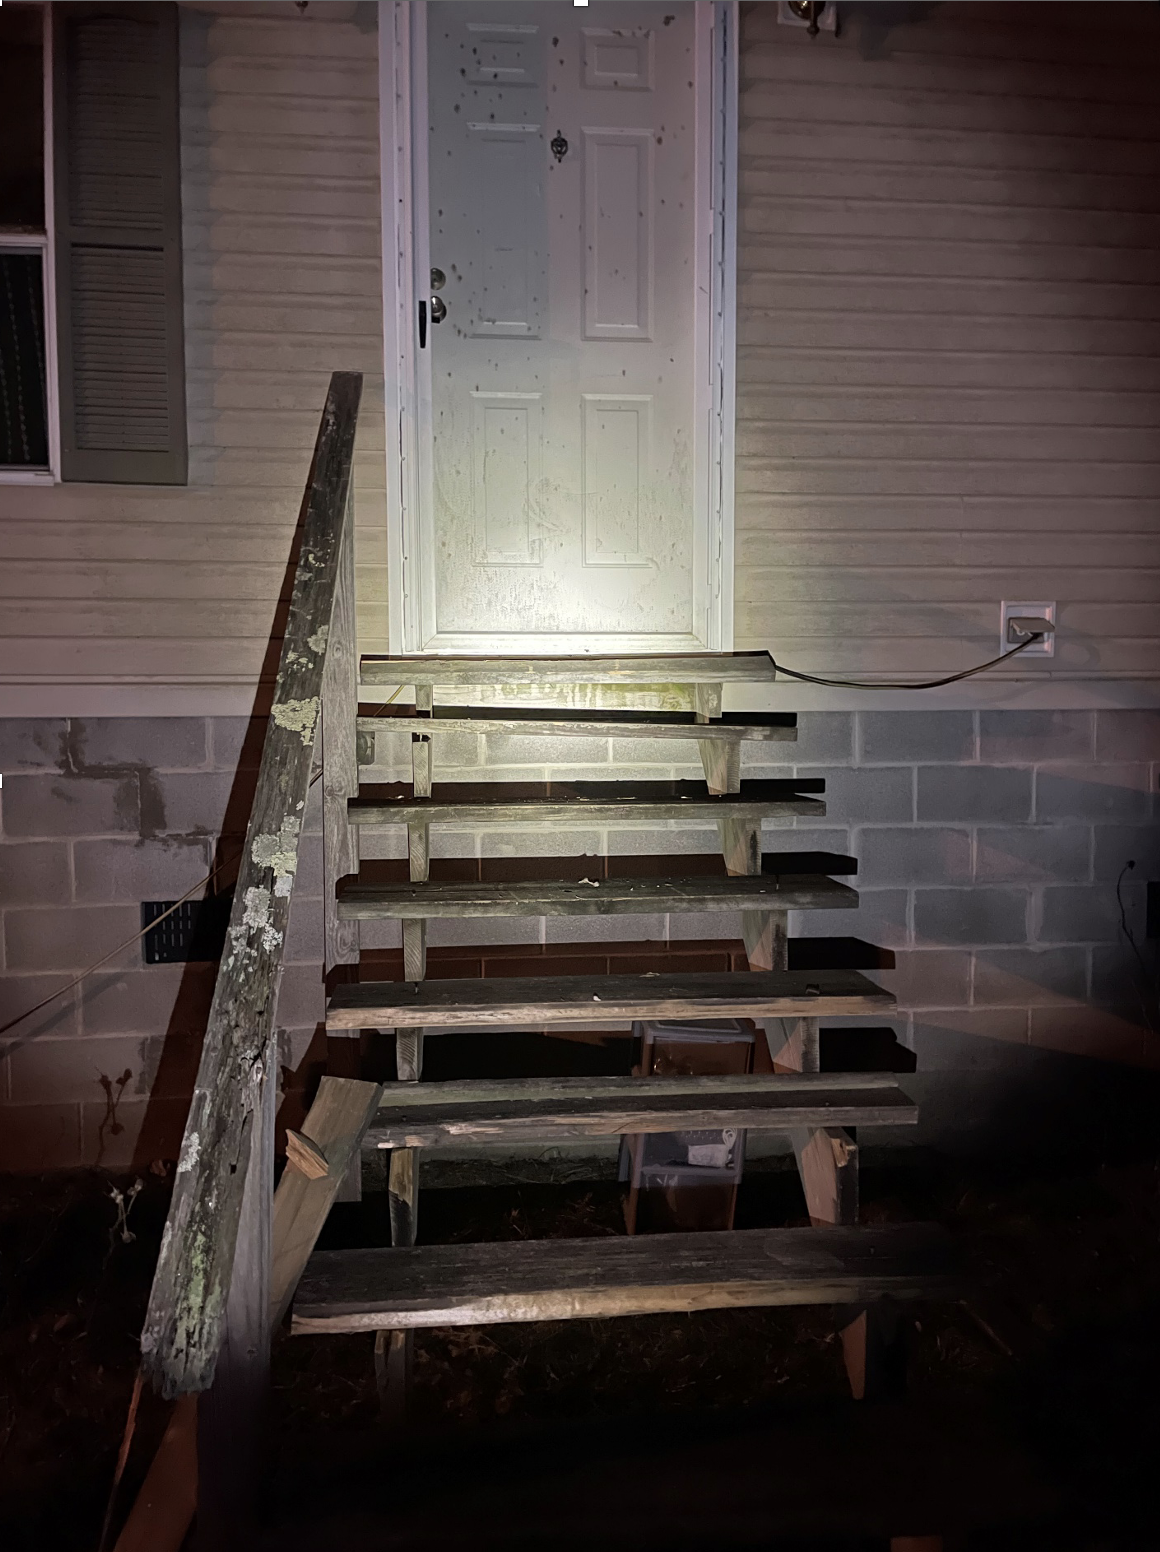 Between November 21 and January 14, a residence on Cedar Springs Rd in Jacksonville fell victim to burglary. The unfortunate incident involved substantial damage to several doors and frames, and the theft of a sentimental wedding and engagement ring set. The Calhoun County Sheriff's Office is urging anyone with information related to this case to come forward and assist in resolving this crime. Any information can be given at 256-236-6600.